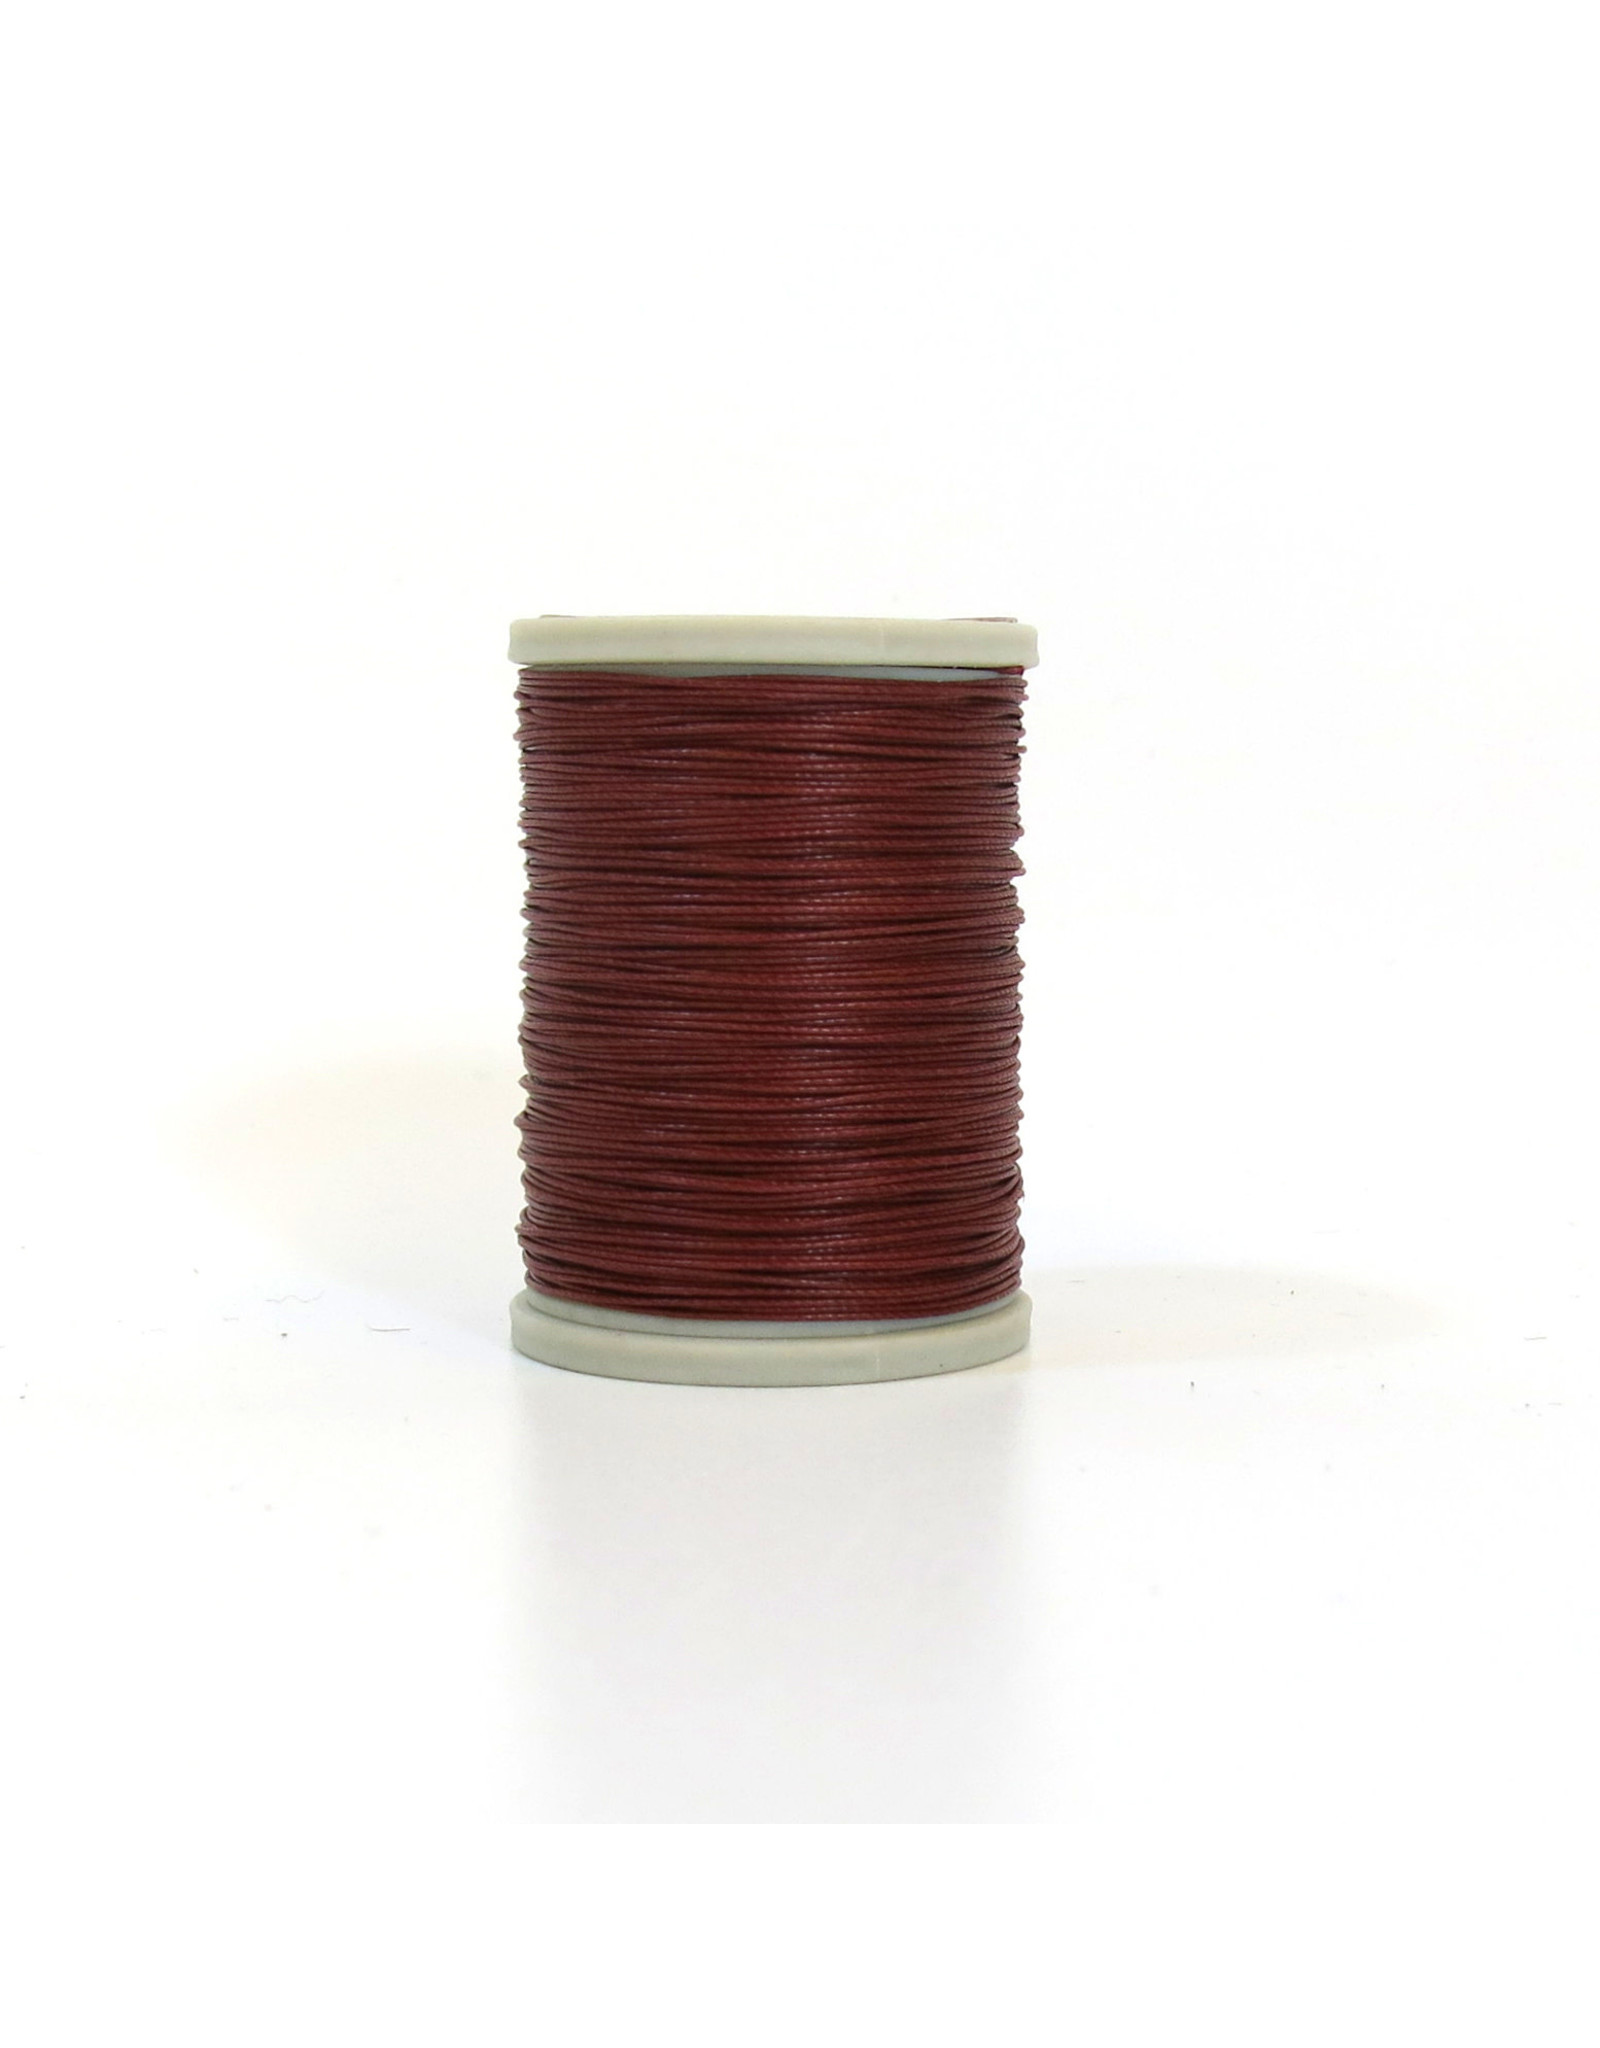 Hand sewing thread bordeaux